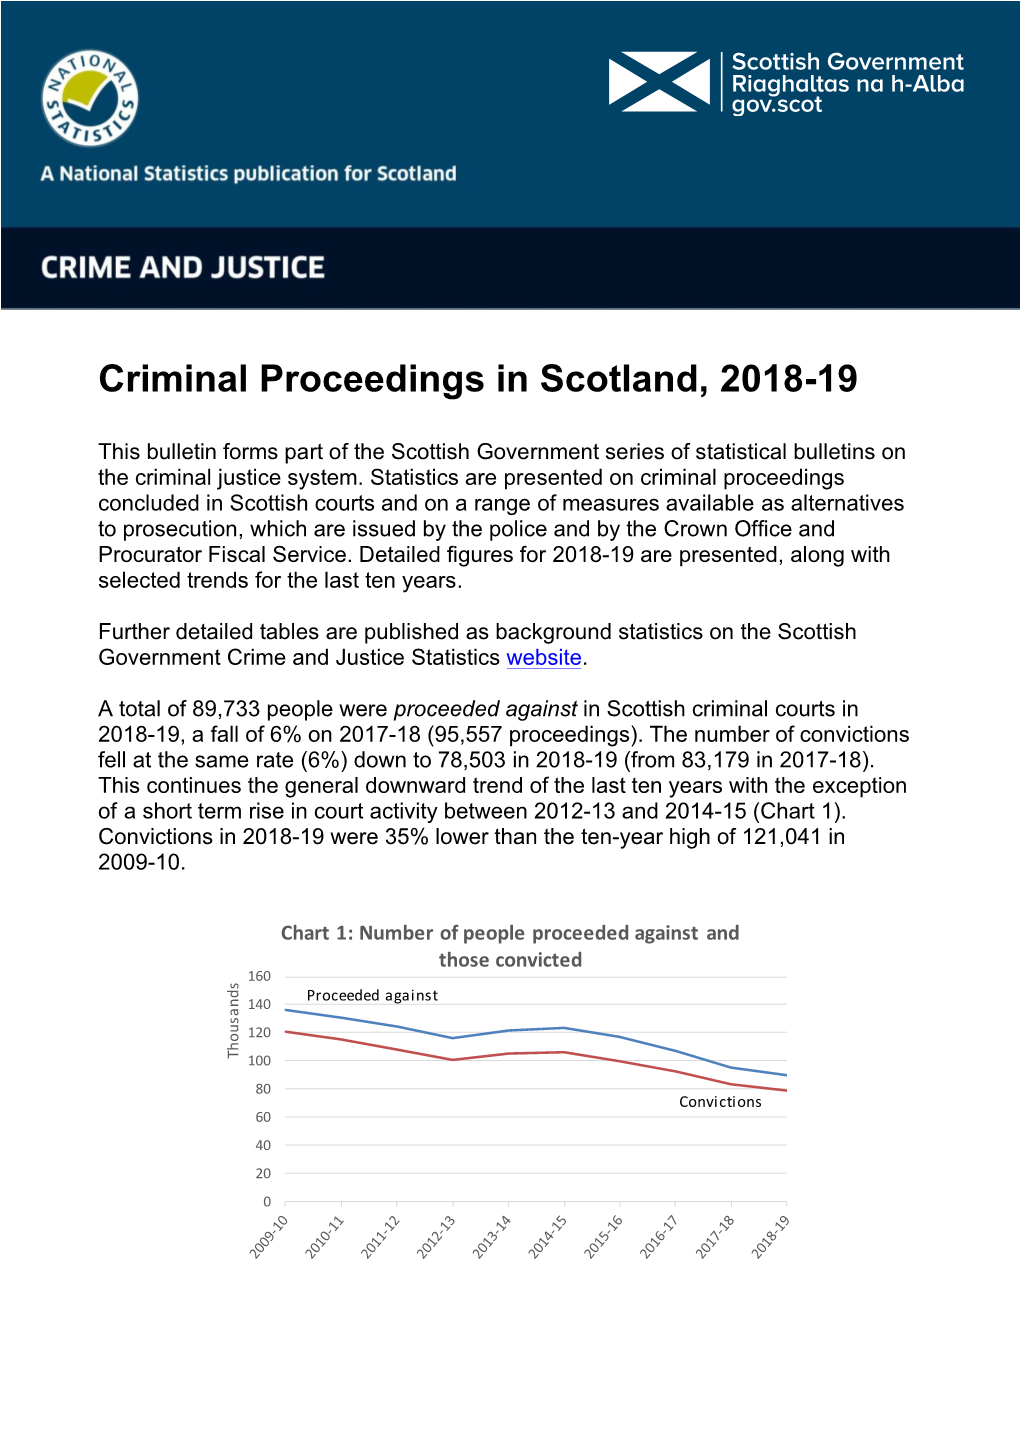 Crime and Justice : Criminal Proceedings in Scotland, 2018-19